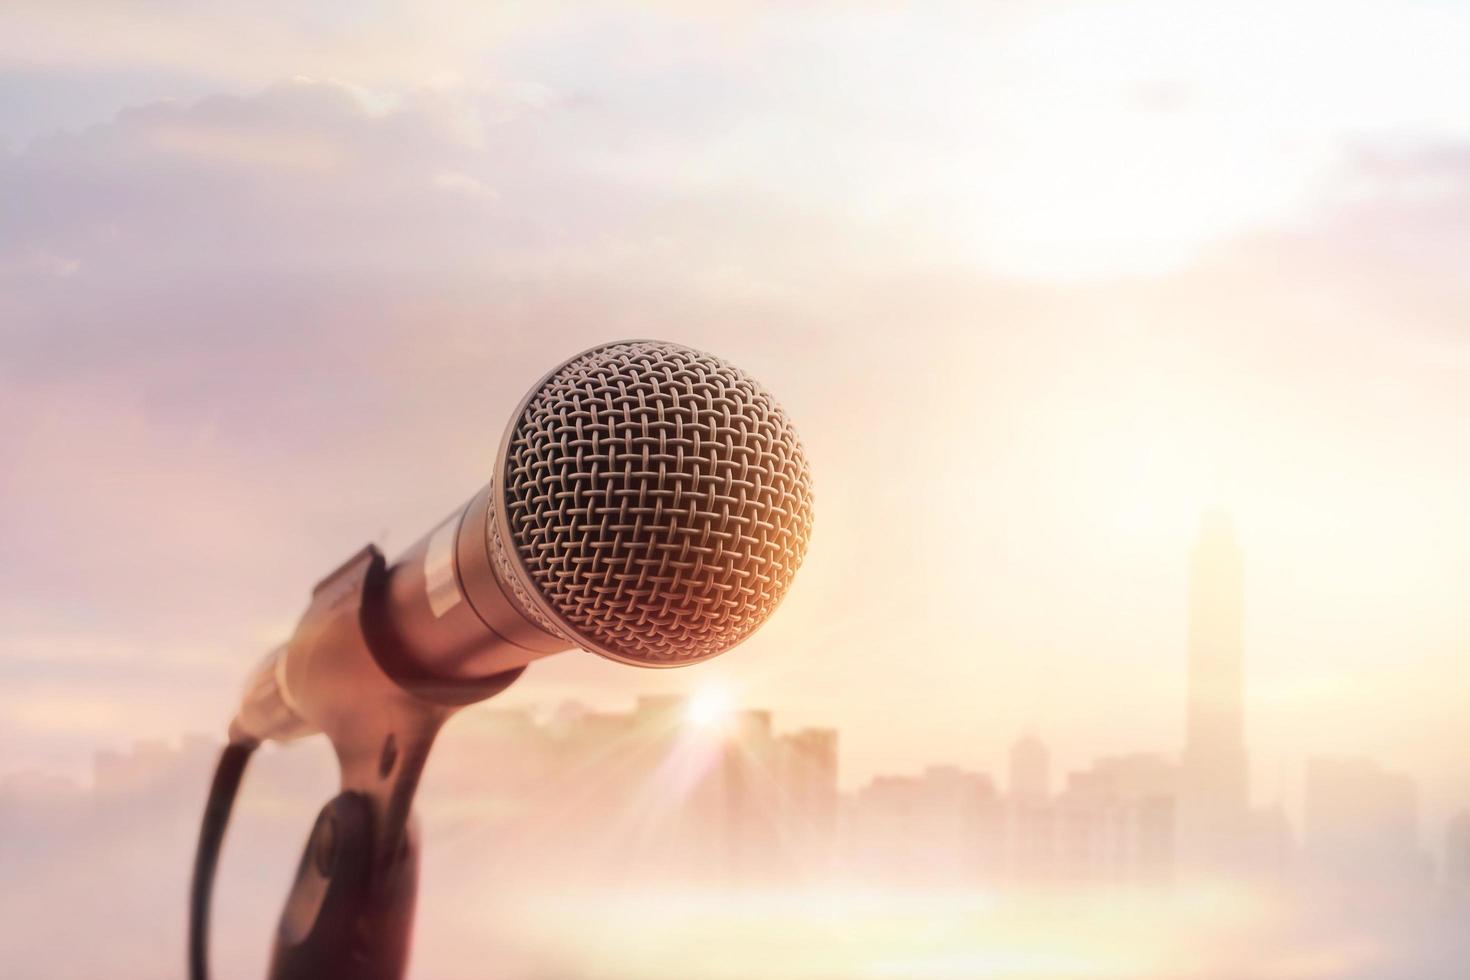 Microphone on stage on warming sunset city background photo